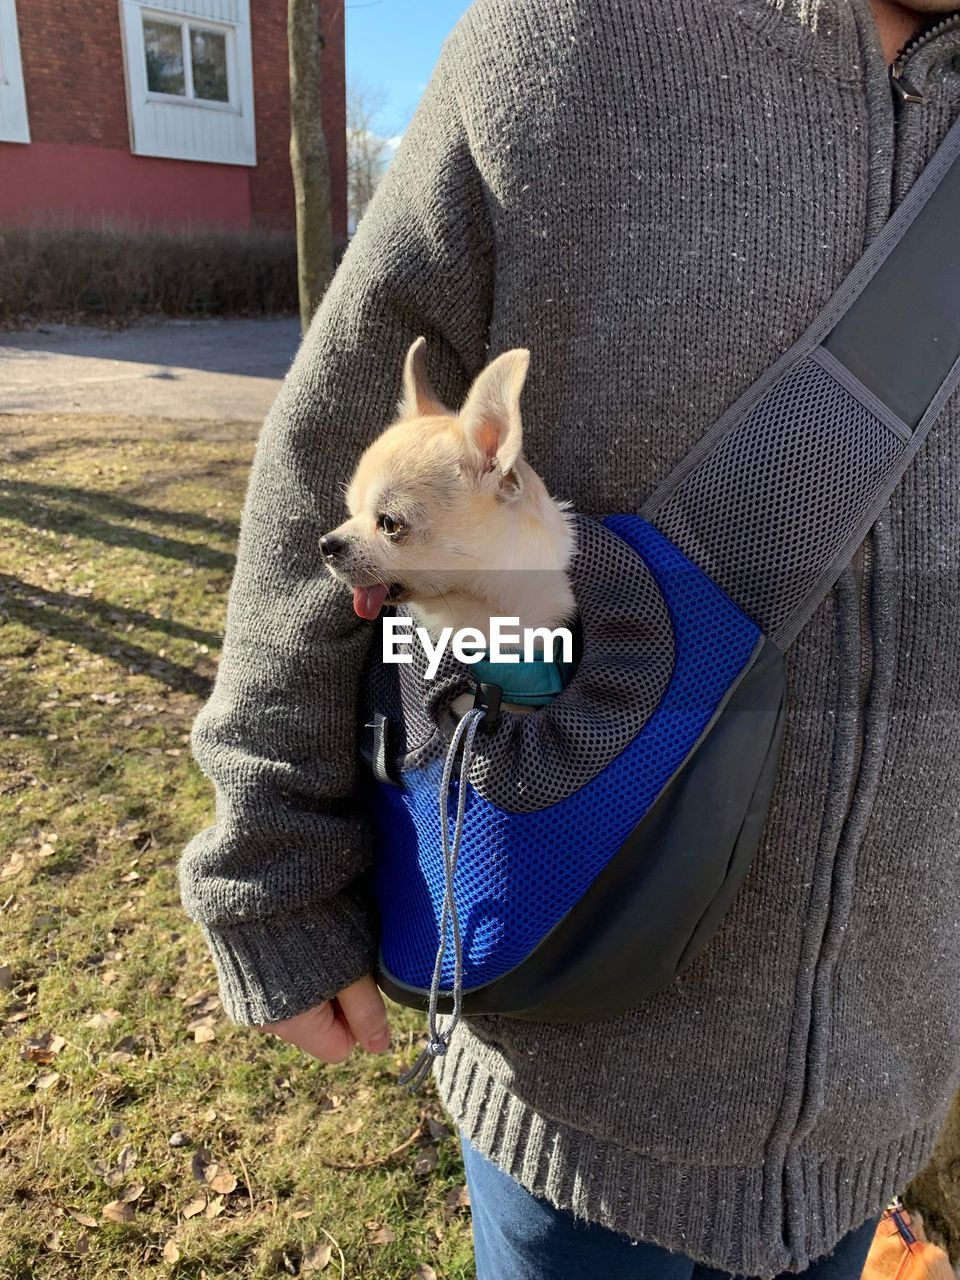 Midsection of man with a chihuahua in a carrier out for a walk